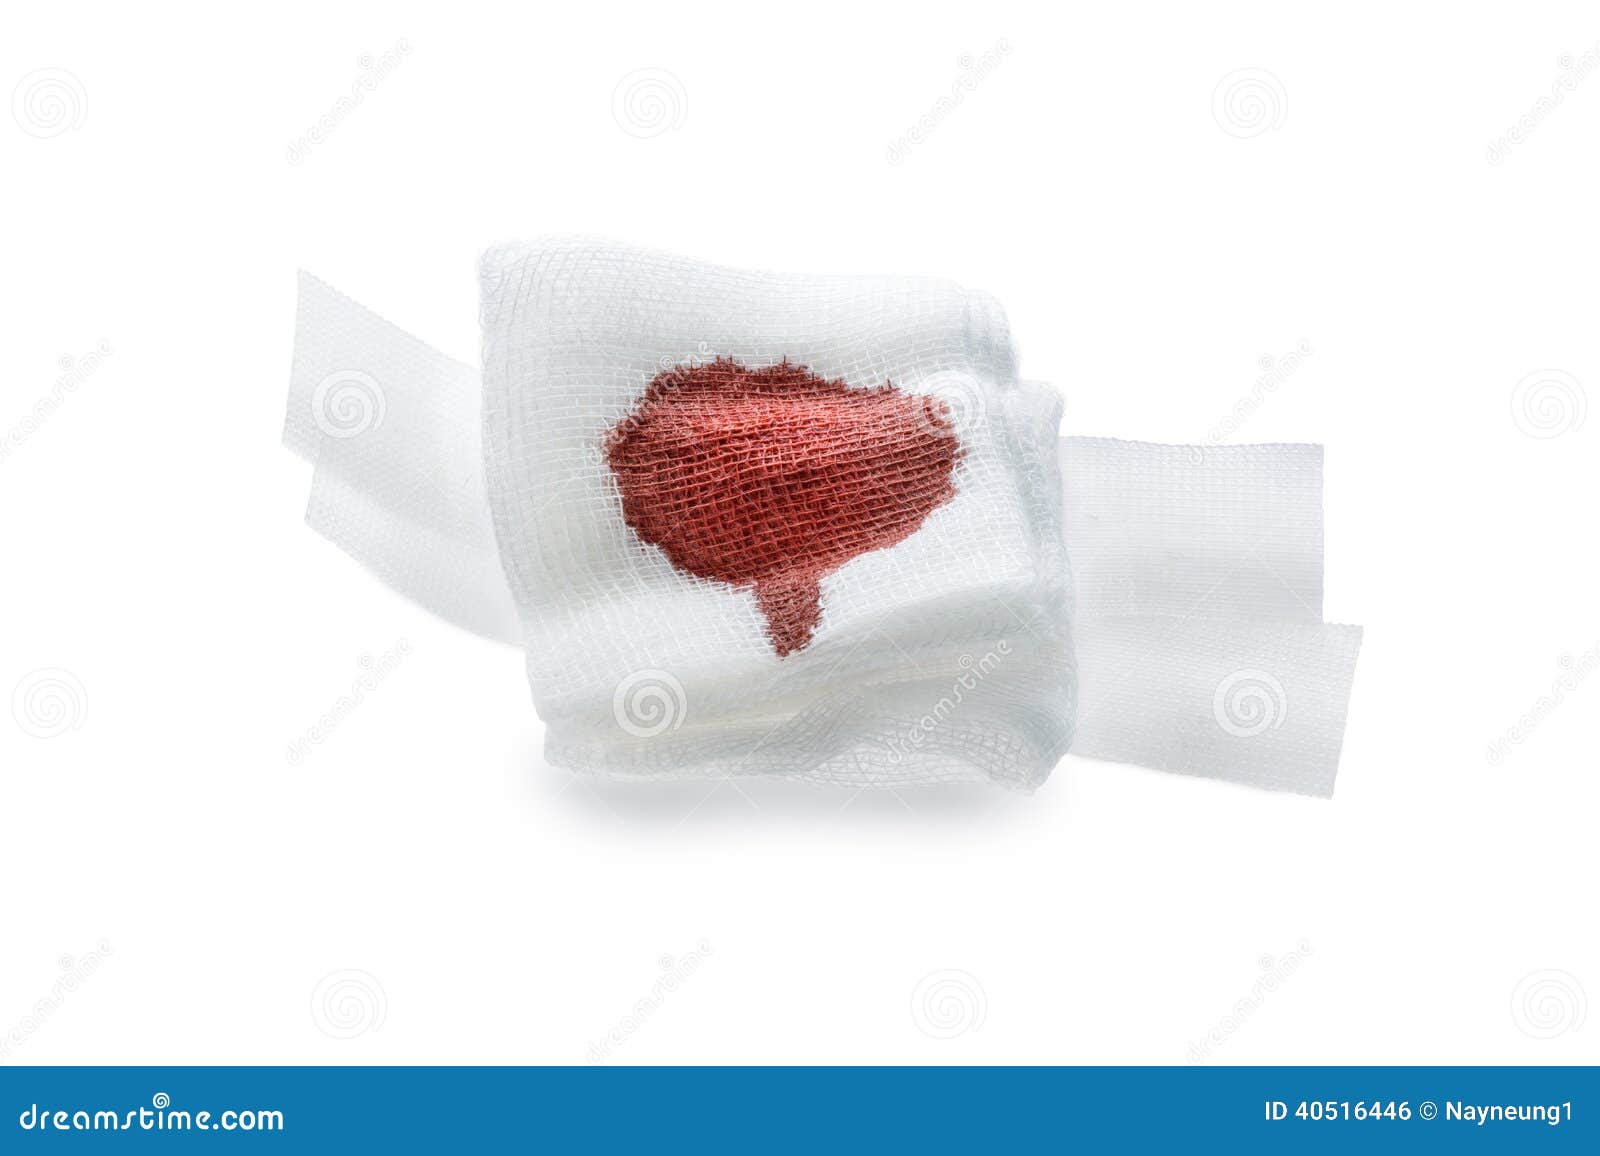 3 626 Bandage Blood Photos Free Royalty Free Stock Photos From Dreamstime